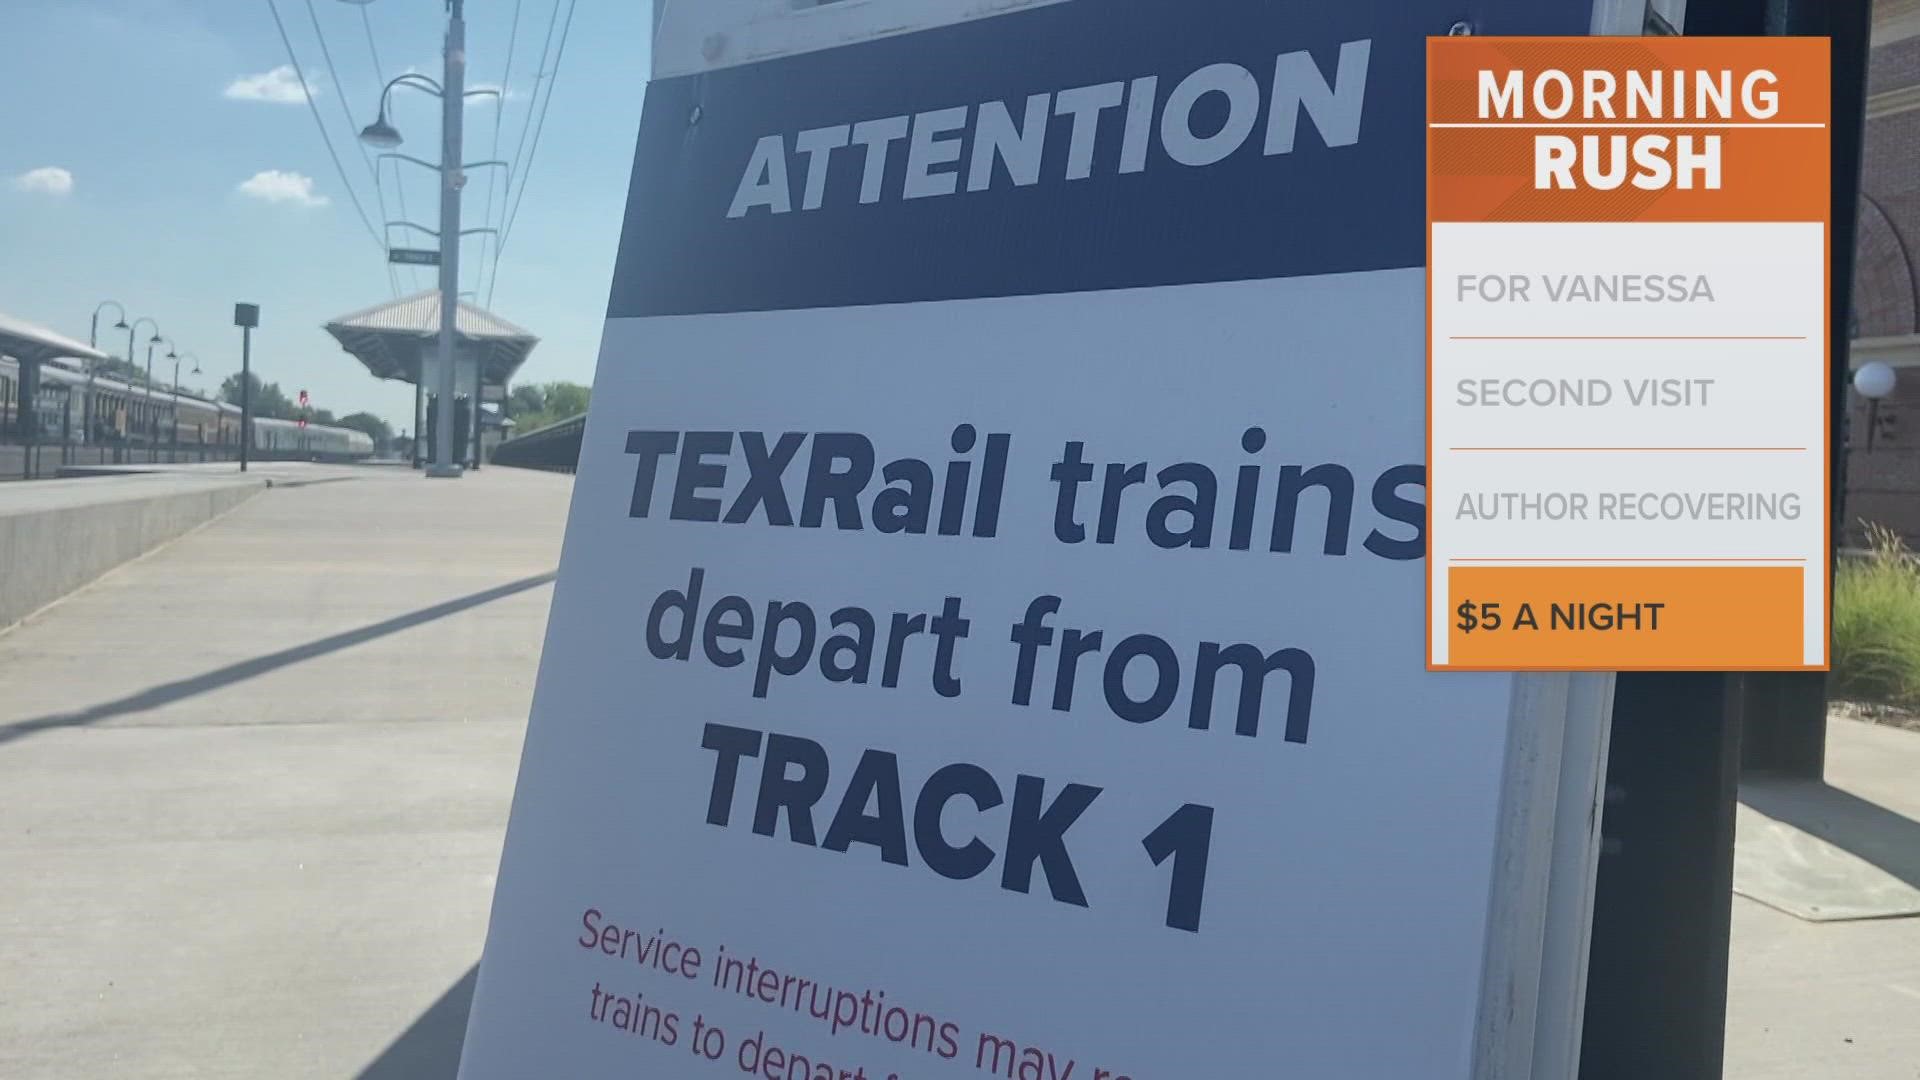 TexRail, which connects to DFW Airport, is now offering $5 longterm parking.